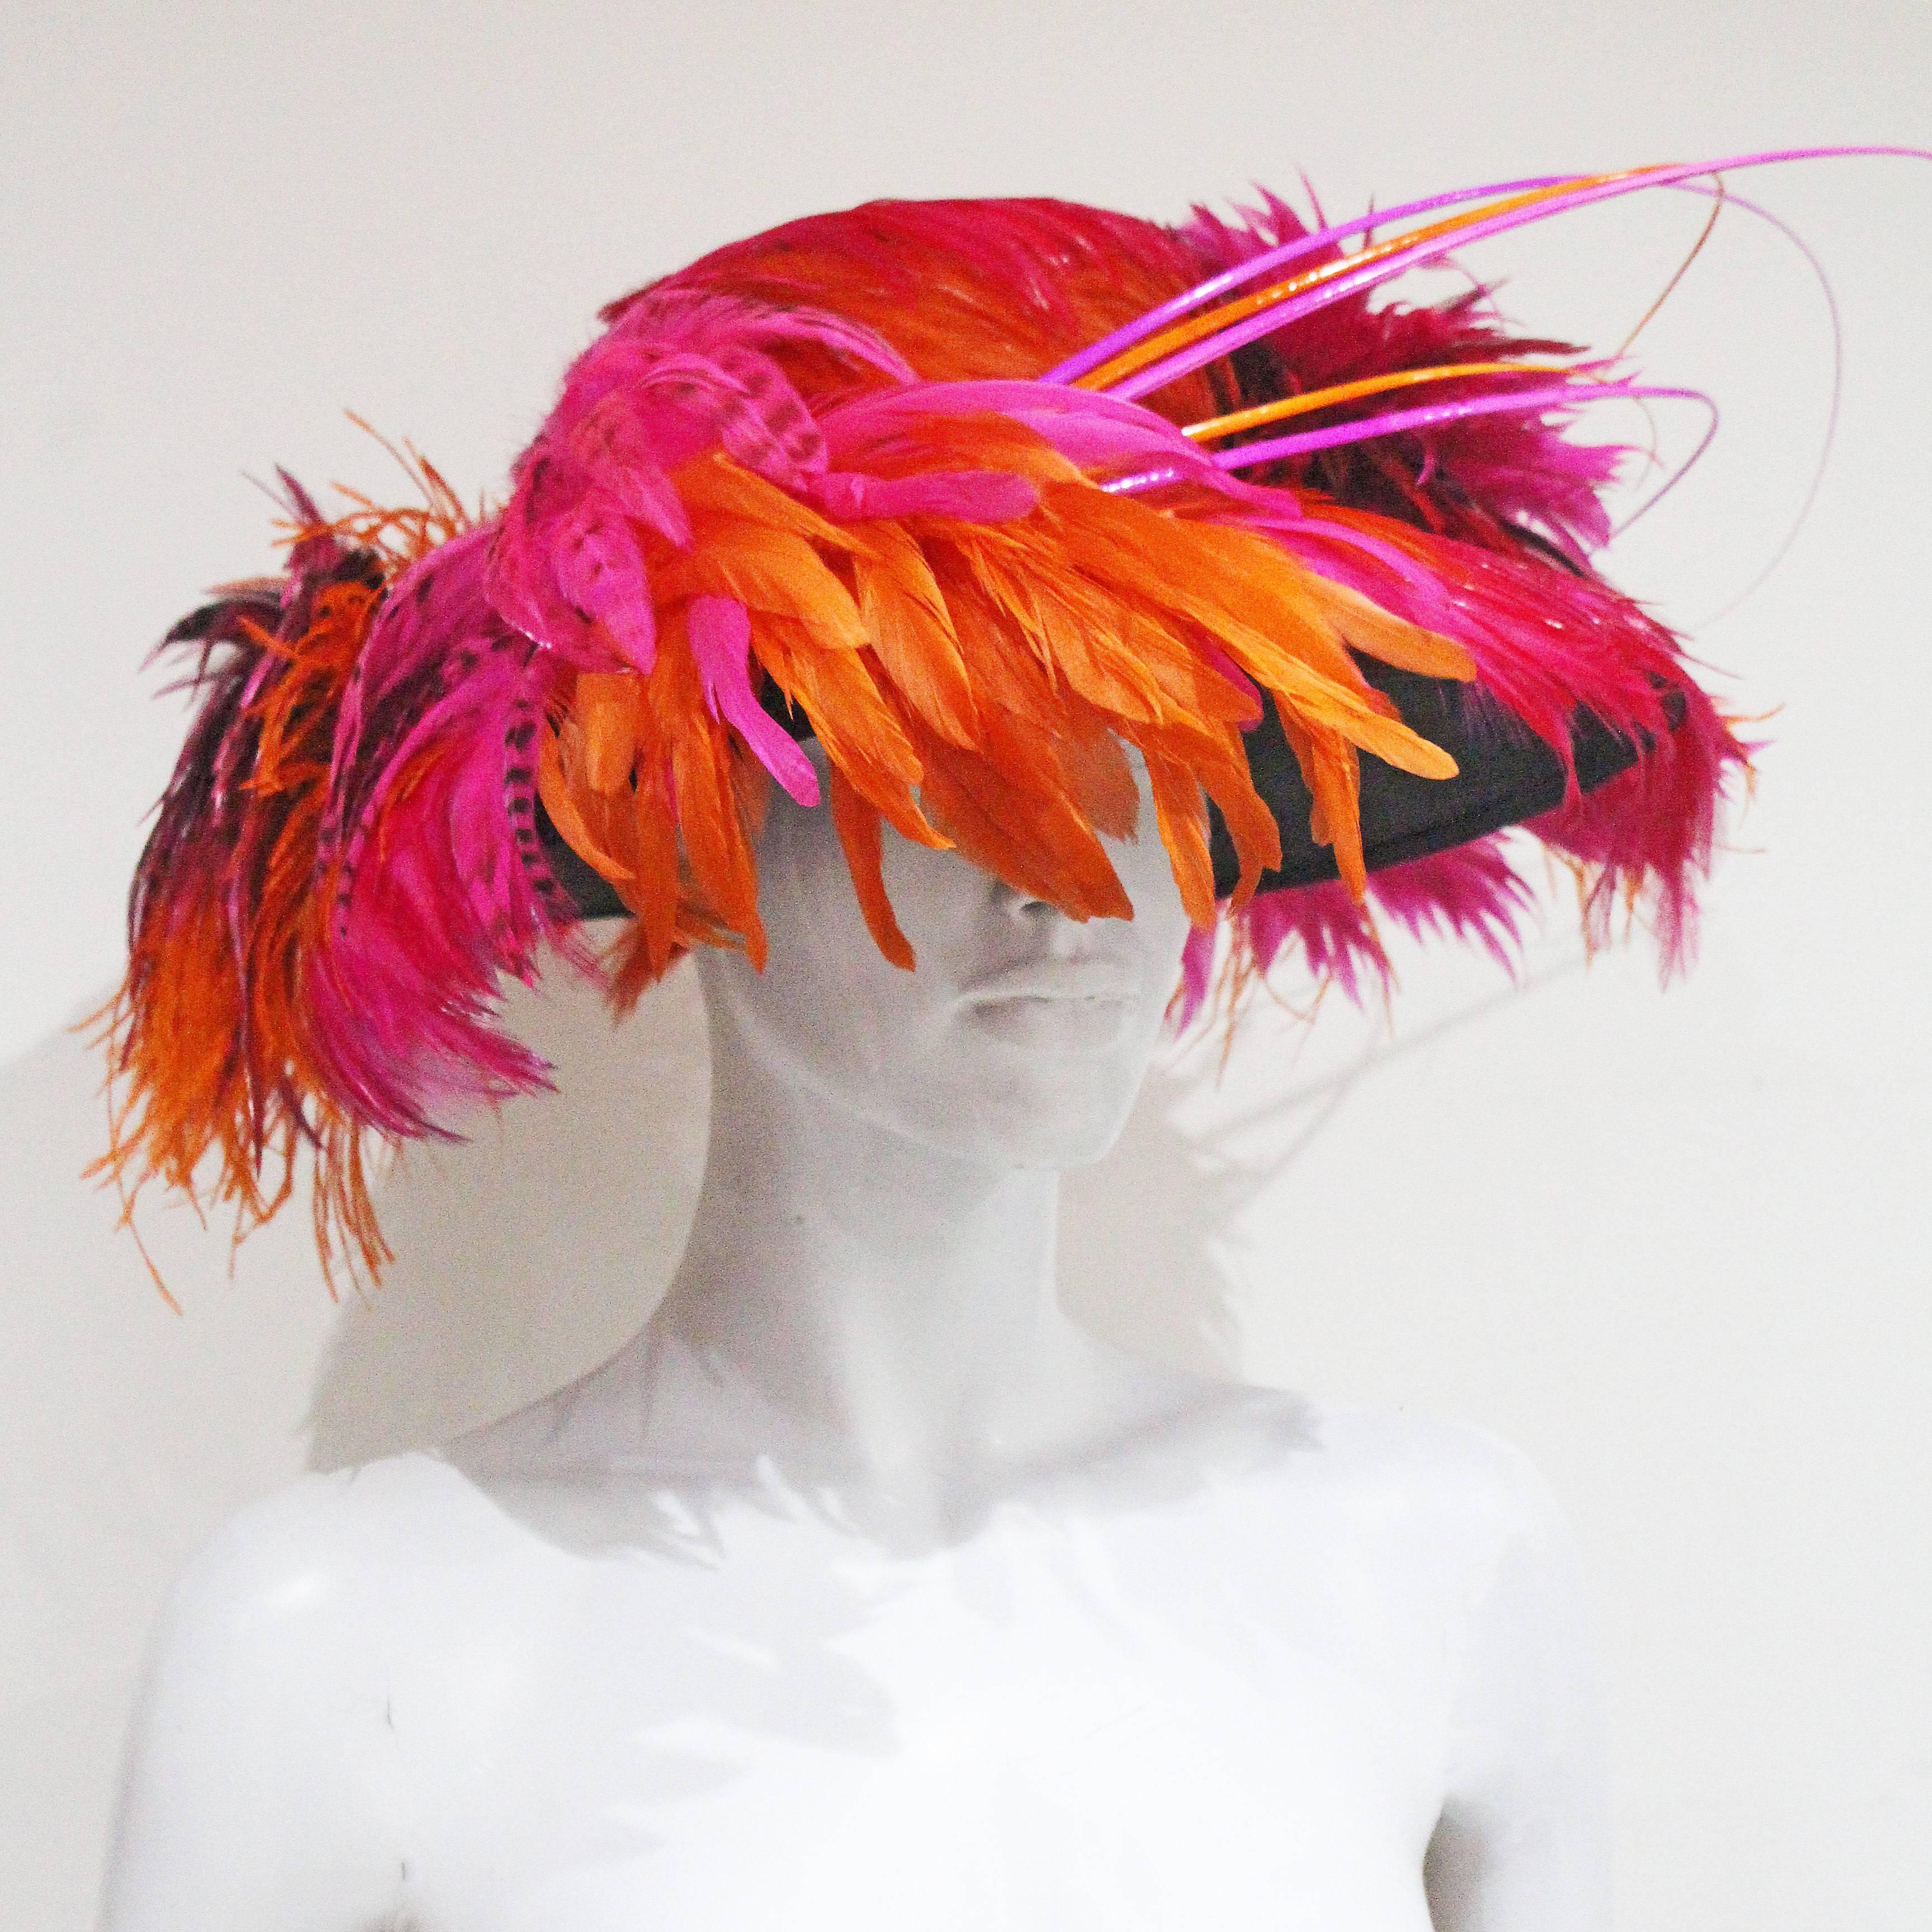 An incredible wide brim hat from the Stephen Jones millenary. The hat was named 'Jungle Green' and was inspired by tropical flowers. This piece was hand made and each individual feather was placed strategically to resemble flowers and plants. This